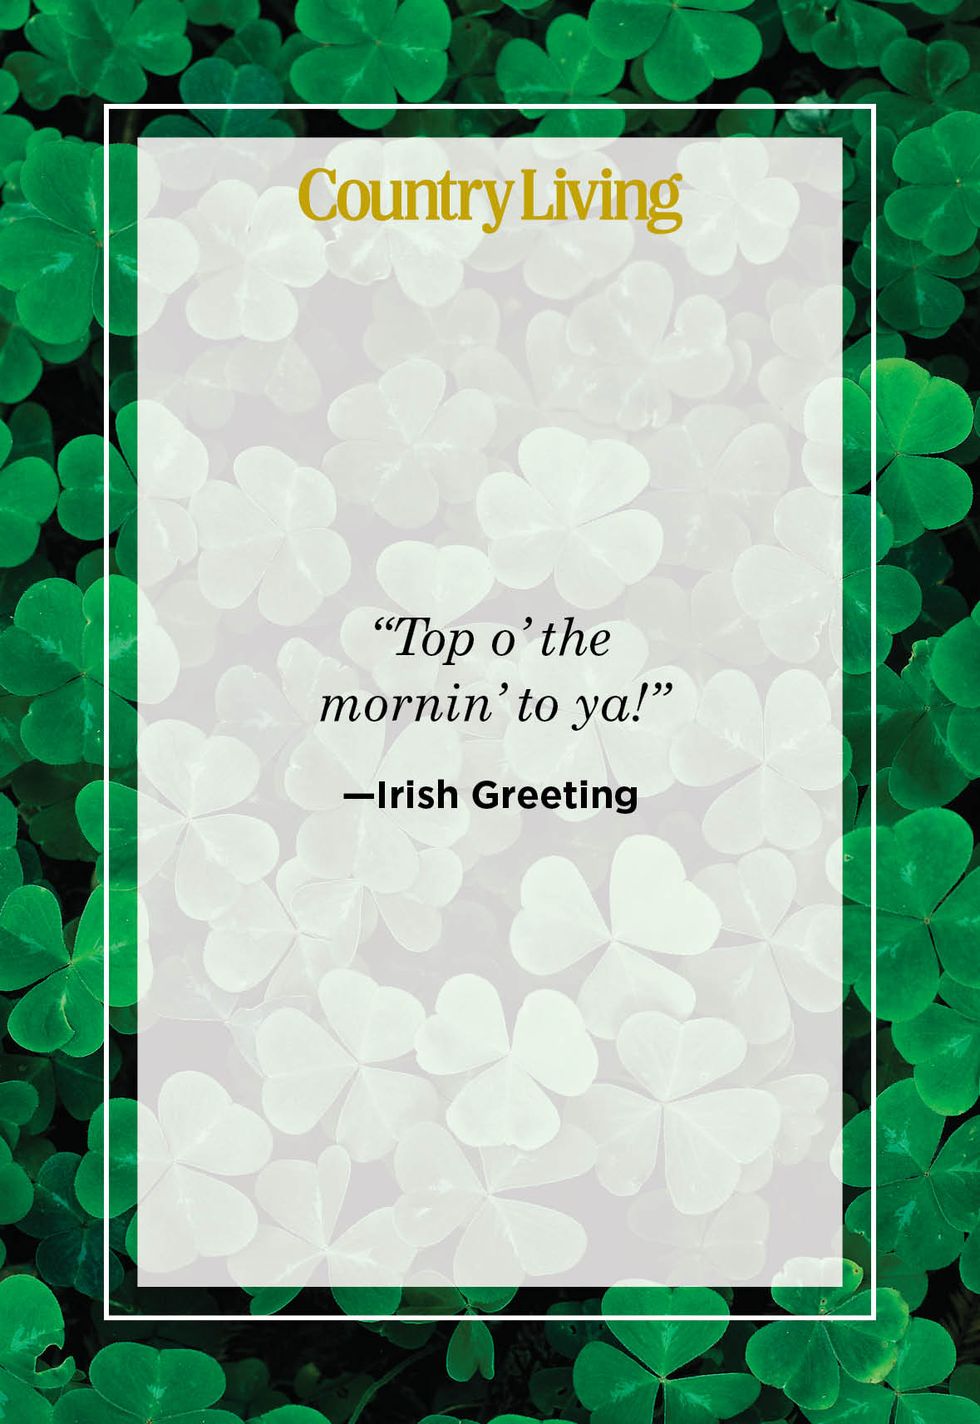 7 Tips to Help You Stick to Recovery this St. Patrick's Day